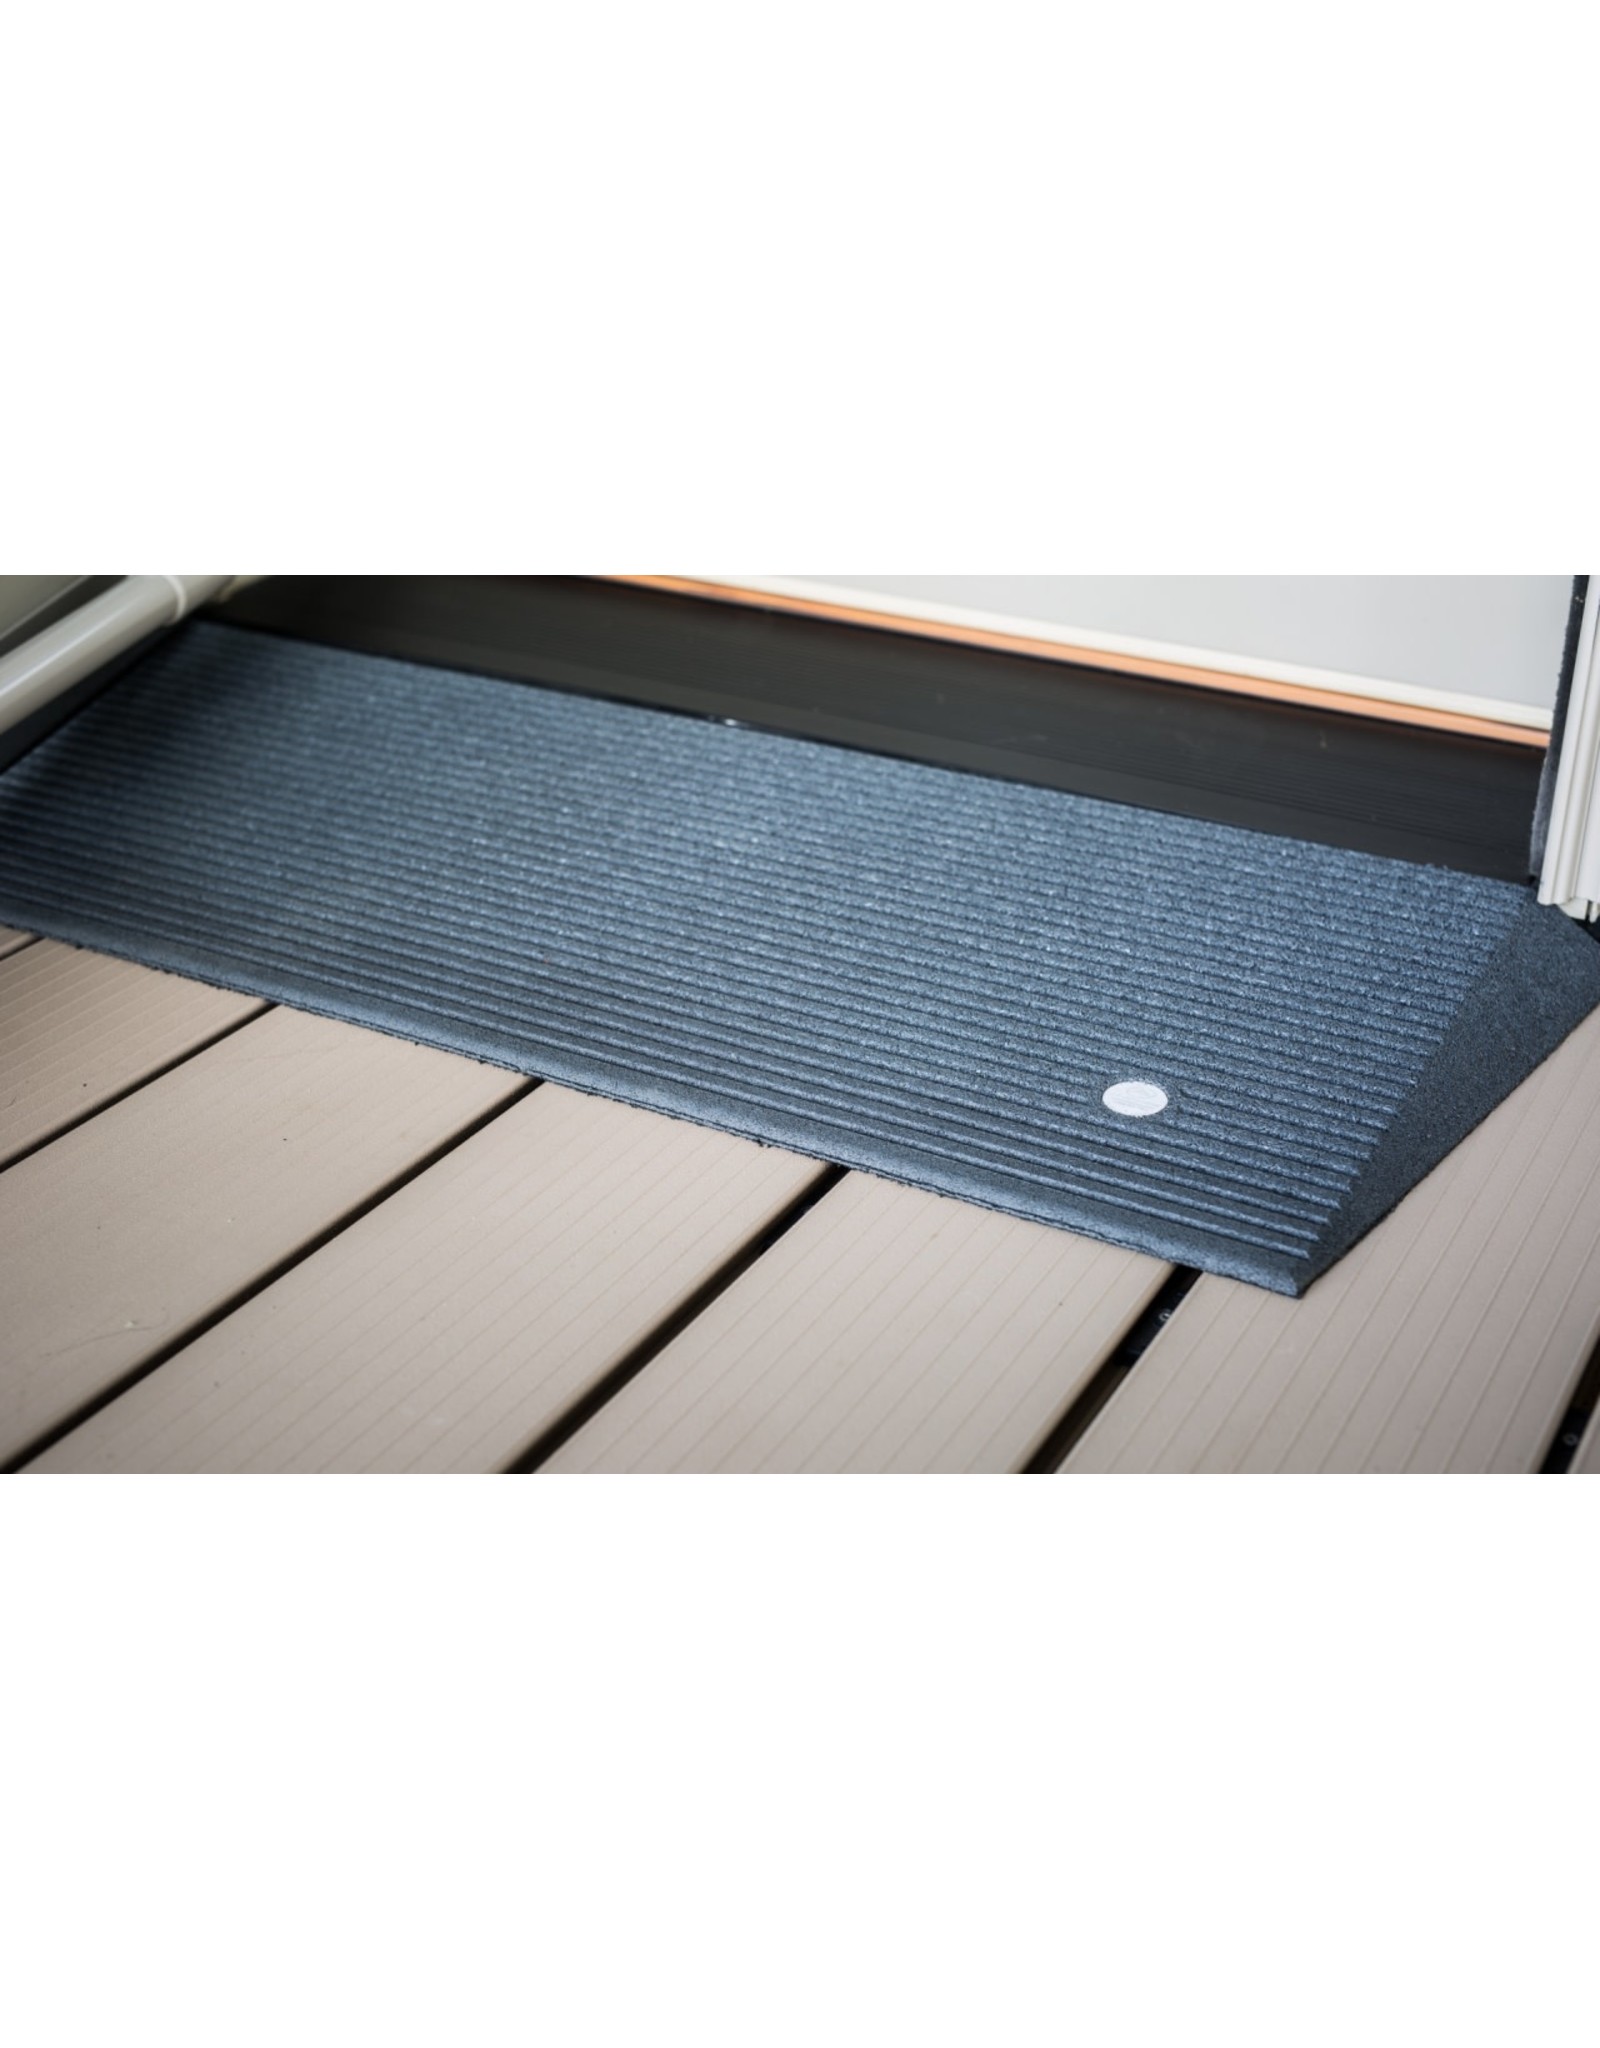 EZ-Access TRANSITIONS ANGLED ENTRY MAT 1.5-IN (1 EA)